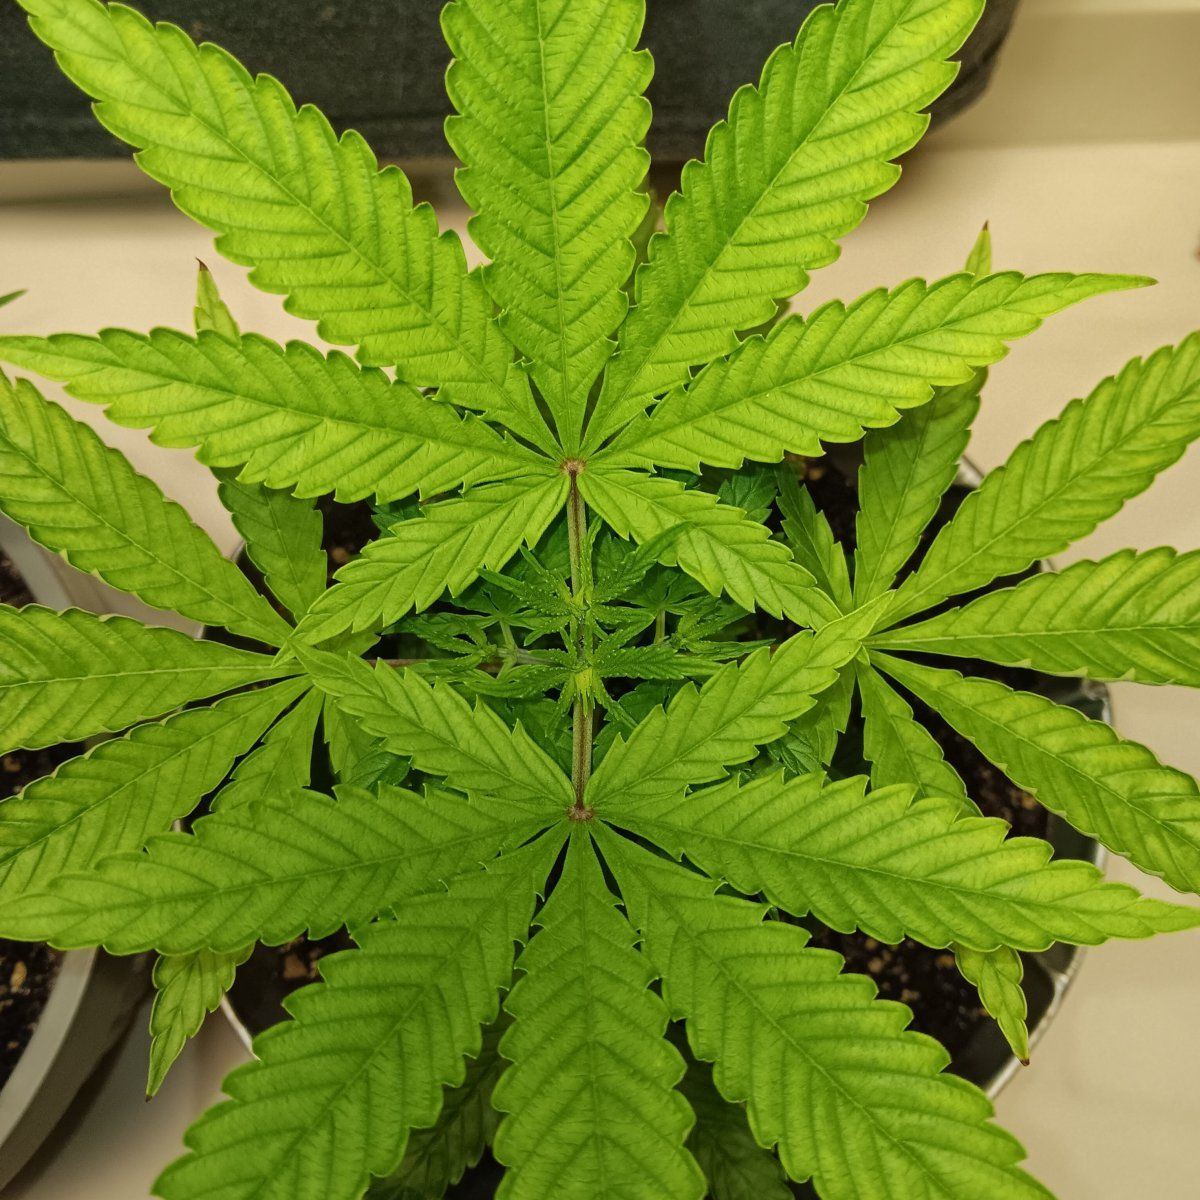 New growers question plants look too light in color on poor persons budget grow 6